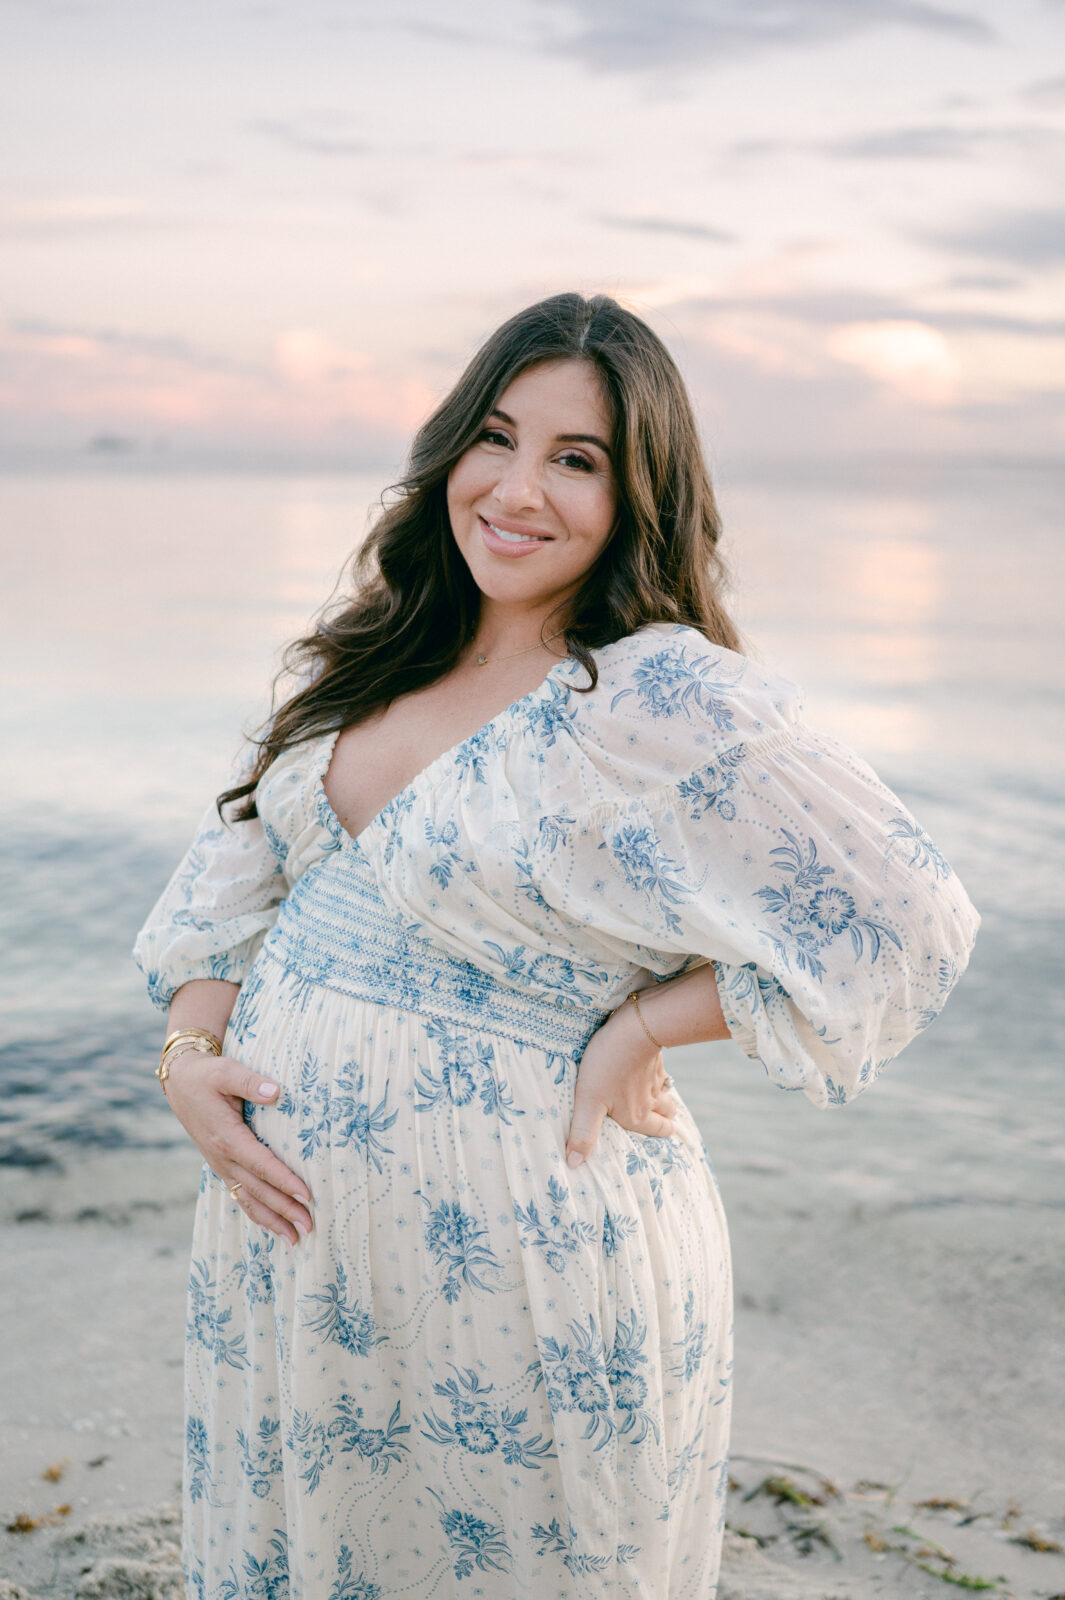 Maternity photo shoot at the beach during sunset